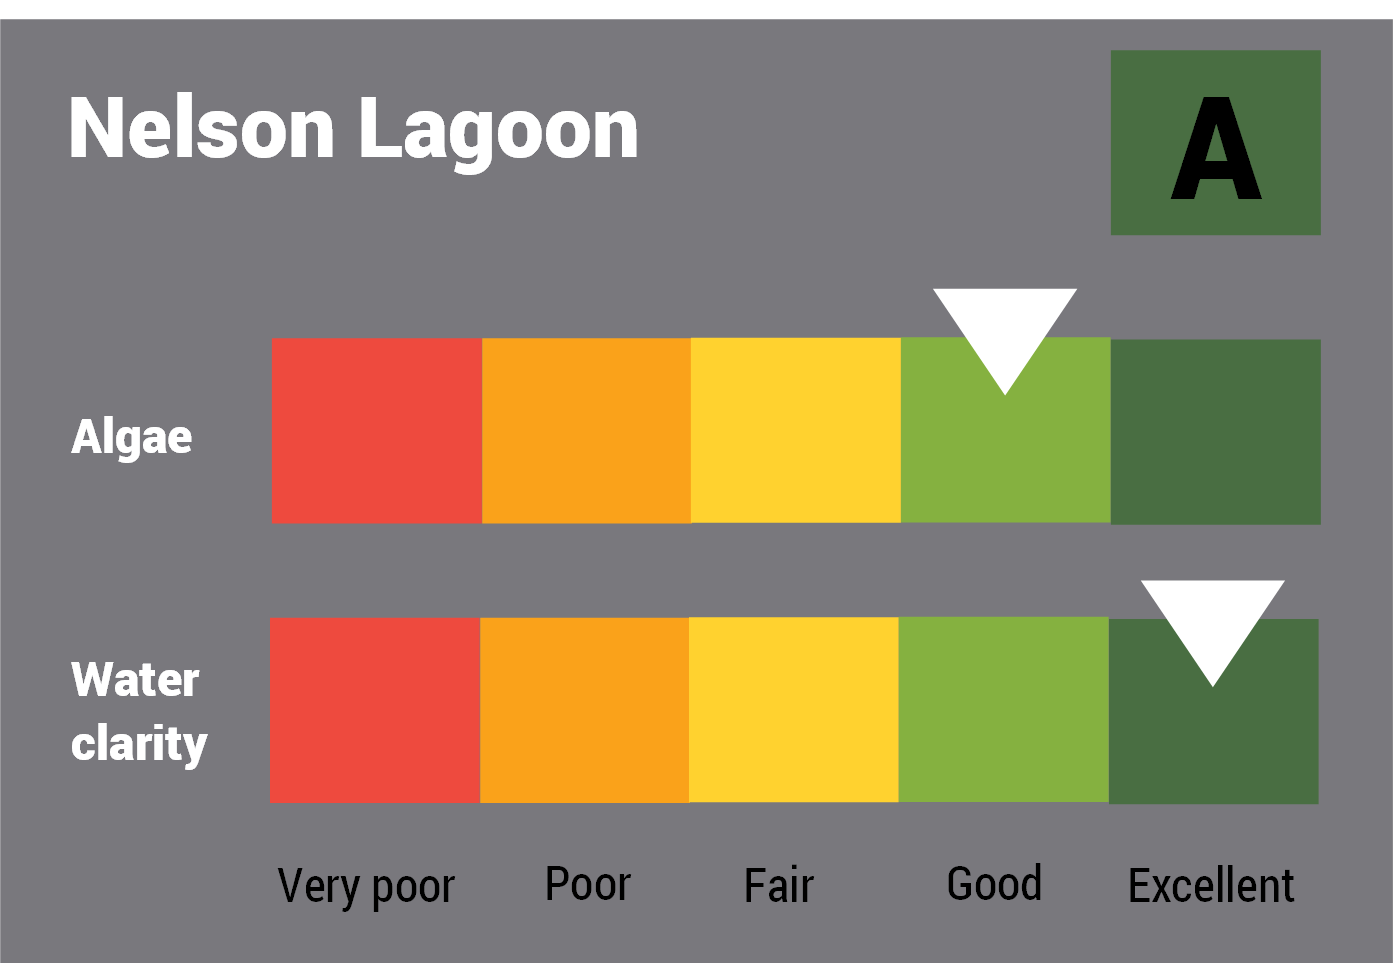 Nelson Lagoon water quality report card for algae and water clarity showing colour-coded ratings (red, orange, yellow, light green and dark green, which represent very poor, poor, fair, good and excellent, respectively). Algae is rated 'excellent' and water clarity is rated 'good' giving an overall rating of 'excellent' or 'A'.